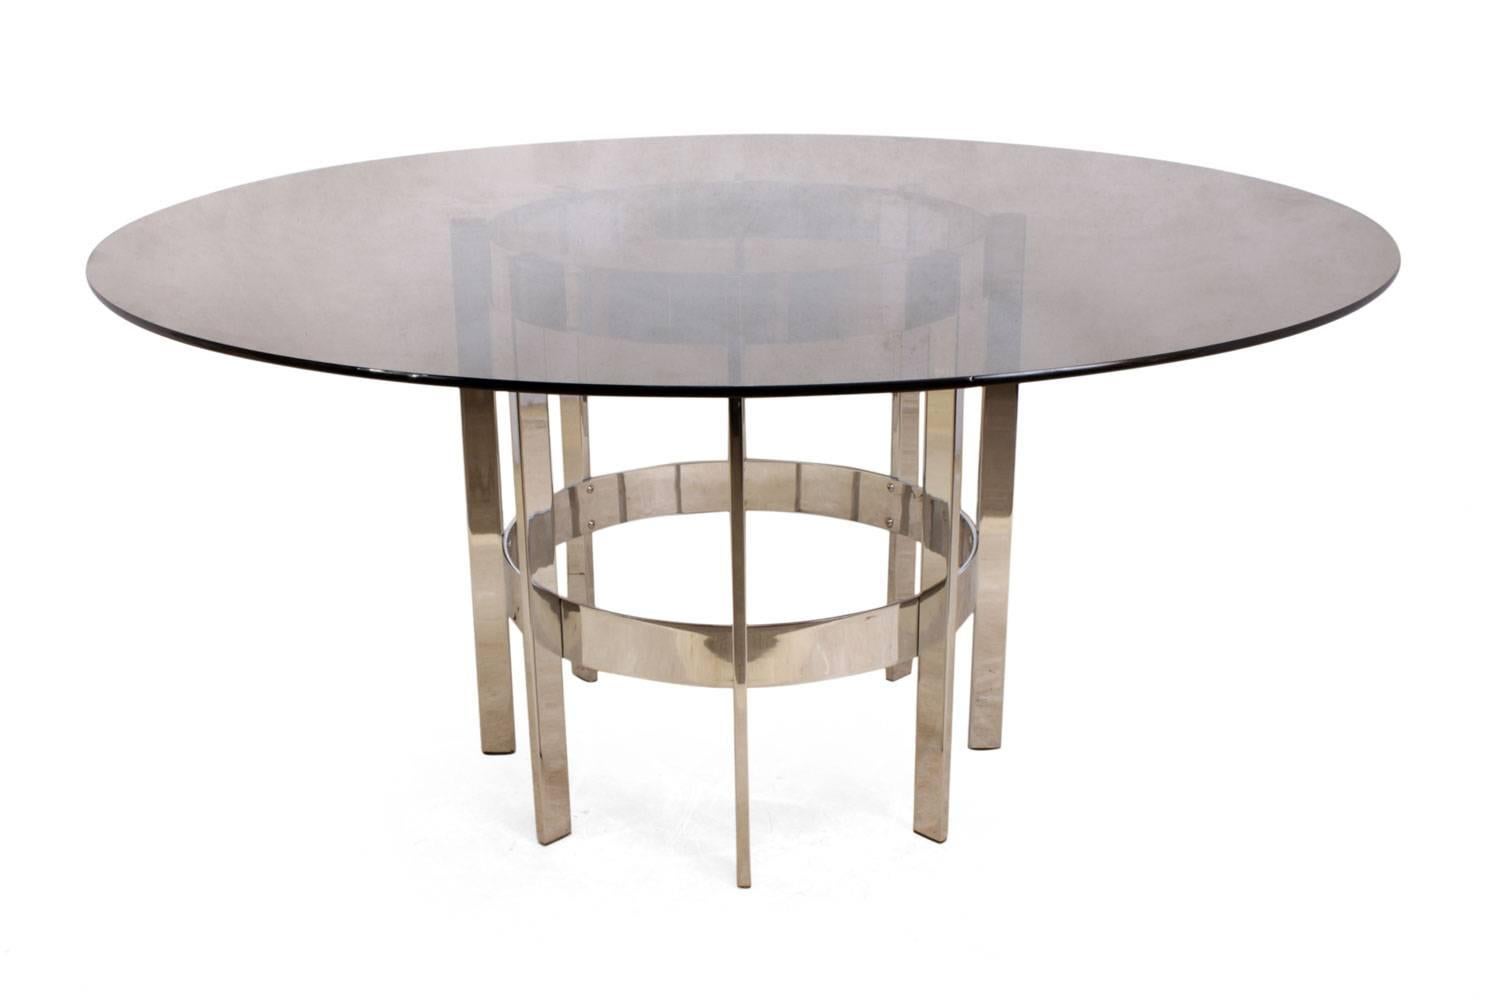 Merrow Associates dining table and eight chairs
This British produced Merrow Associates Dining suite consists of a Dining table with smoked glass top ( a few light scratches to top) and chrome base the chrome is in excellent condition, the set of